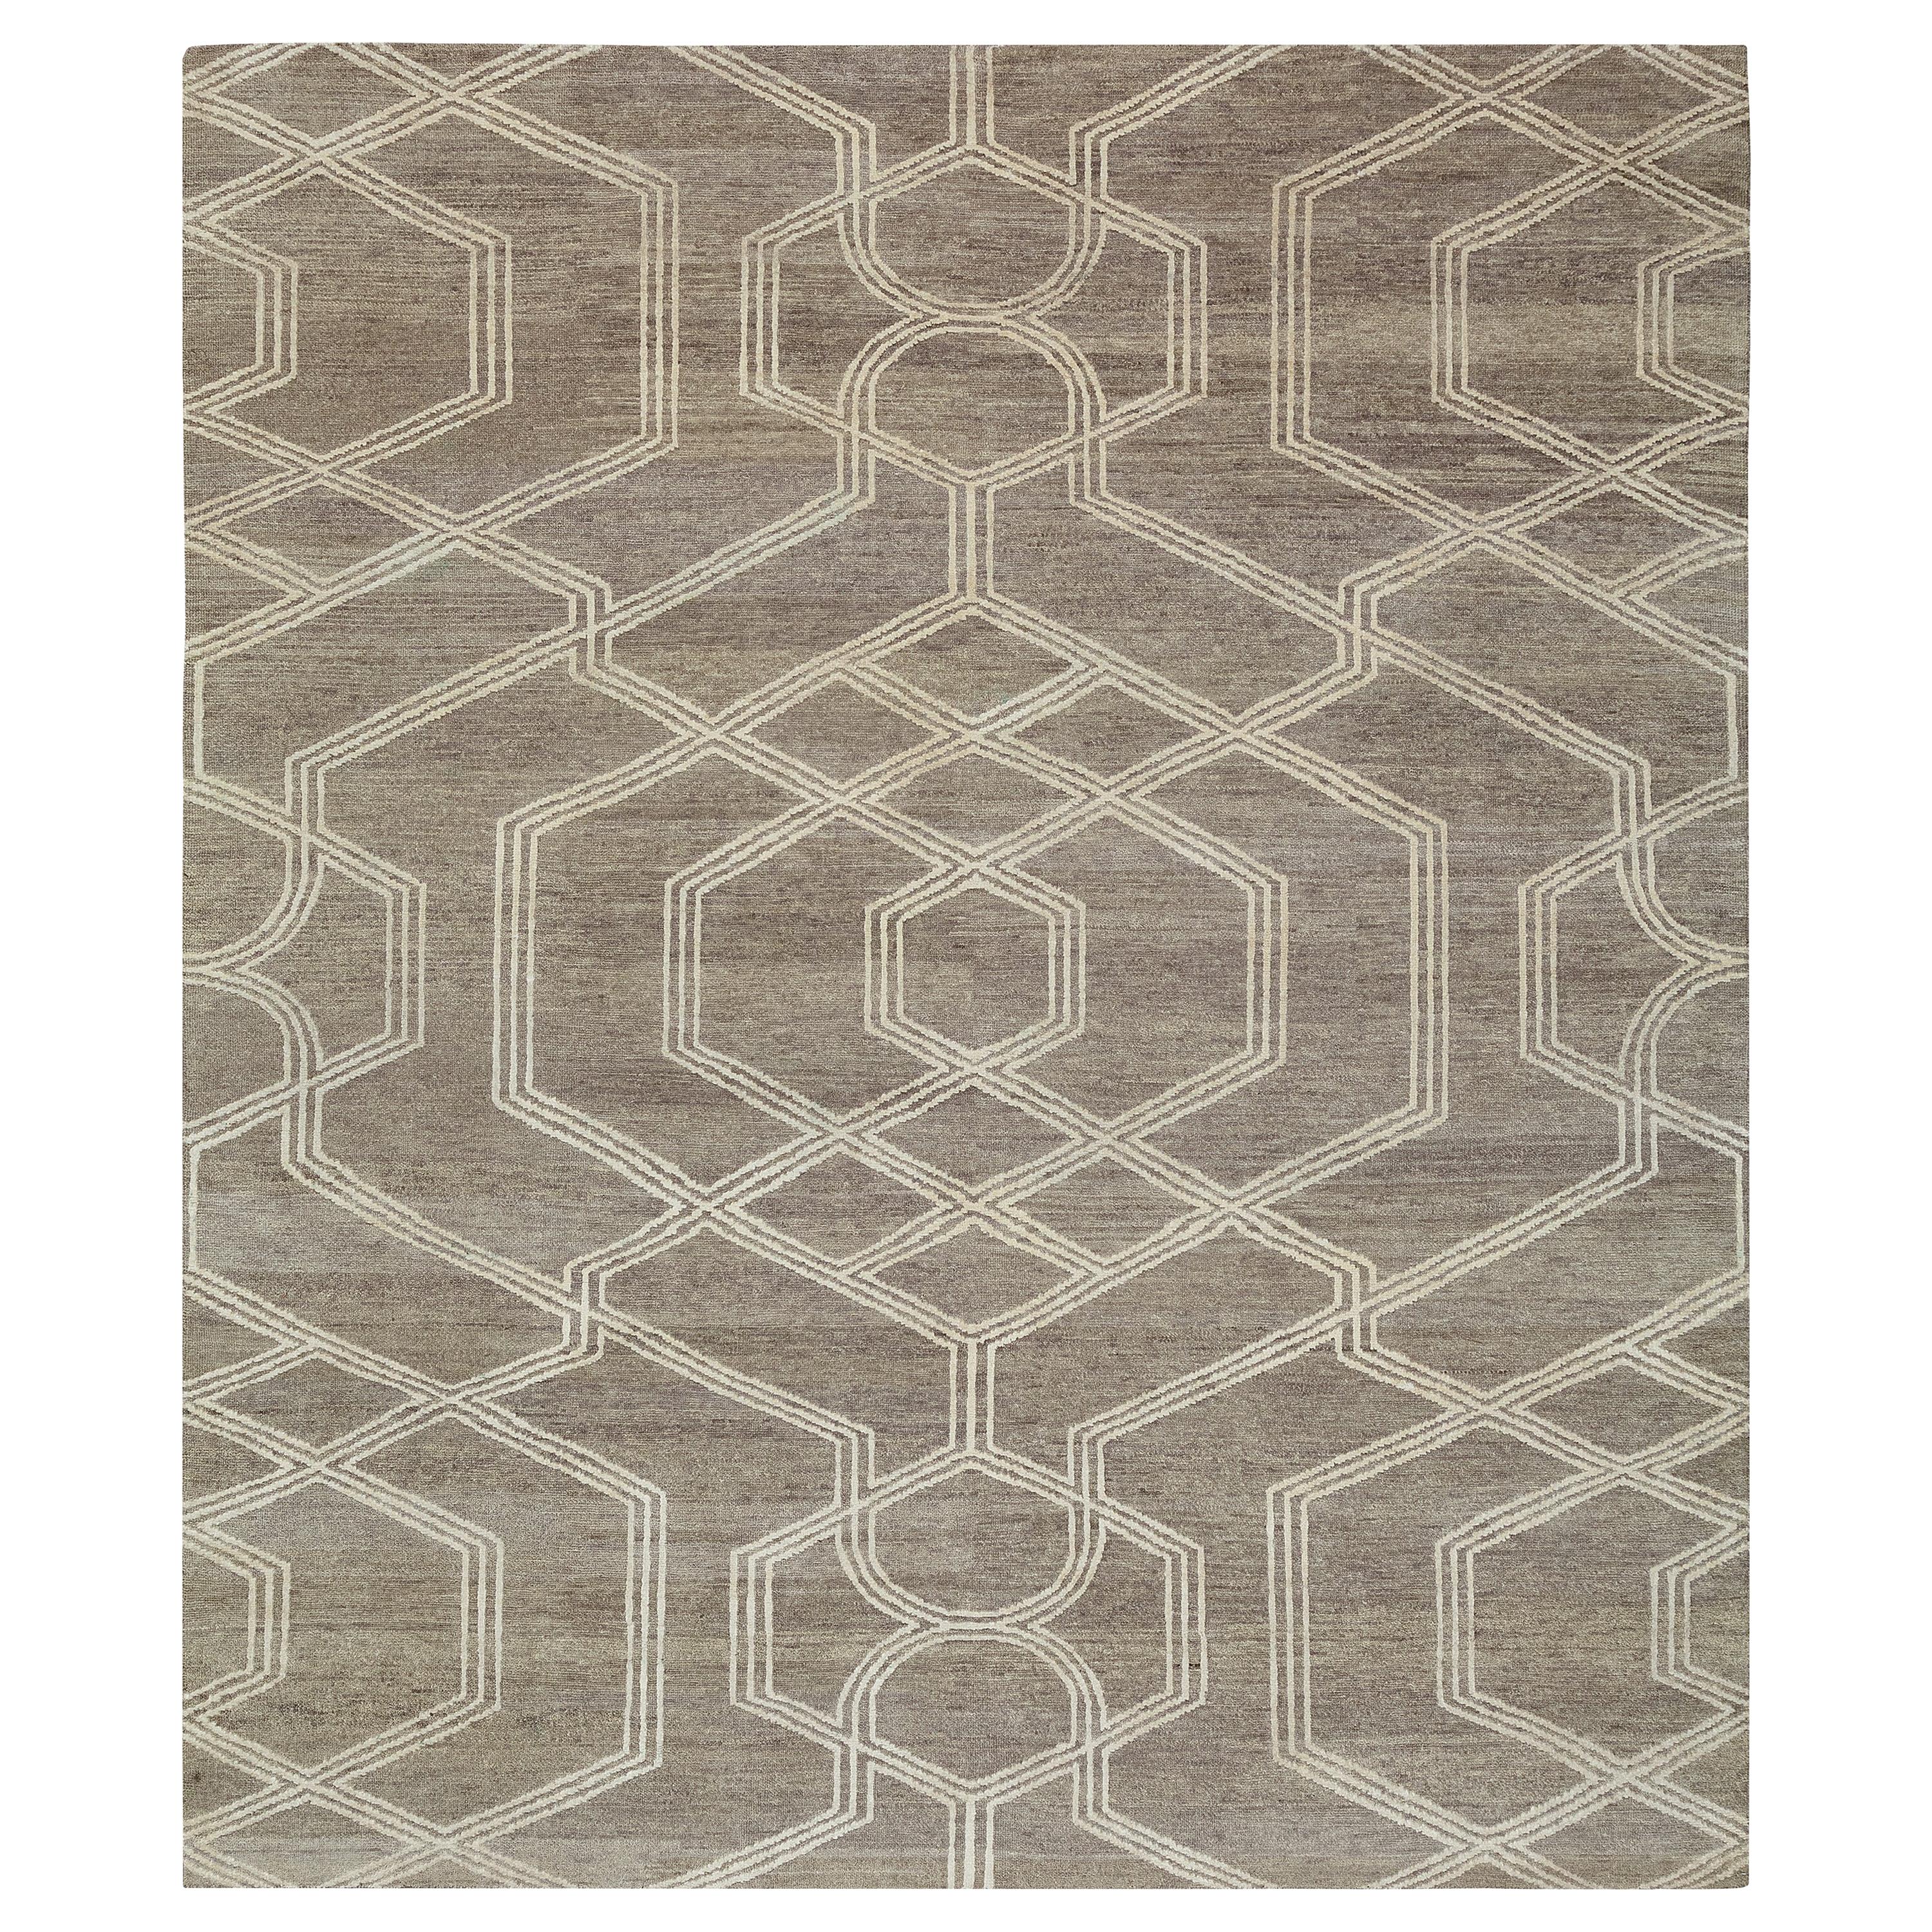 Nazmiyal Collection Decorative Geometric Grey Modern Boutique Rug 8 ft x 10 ft